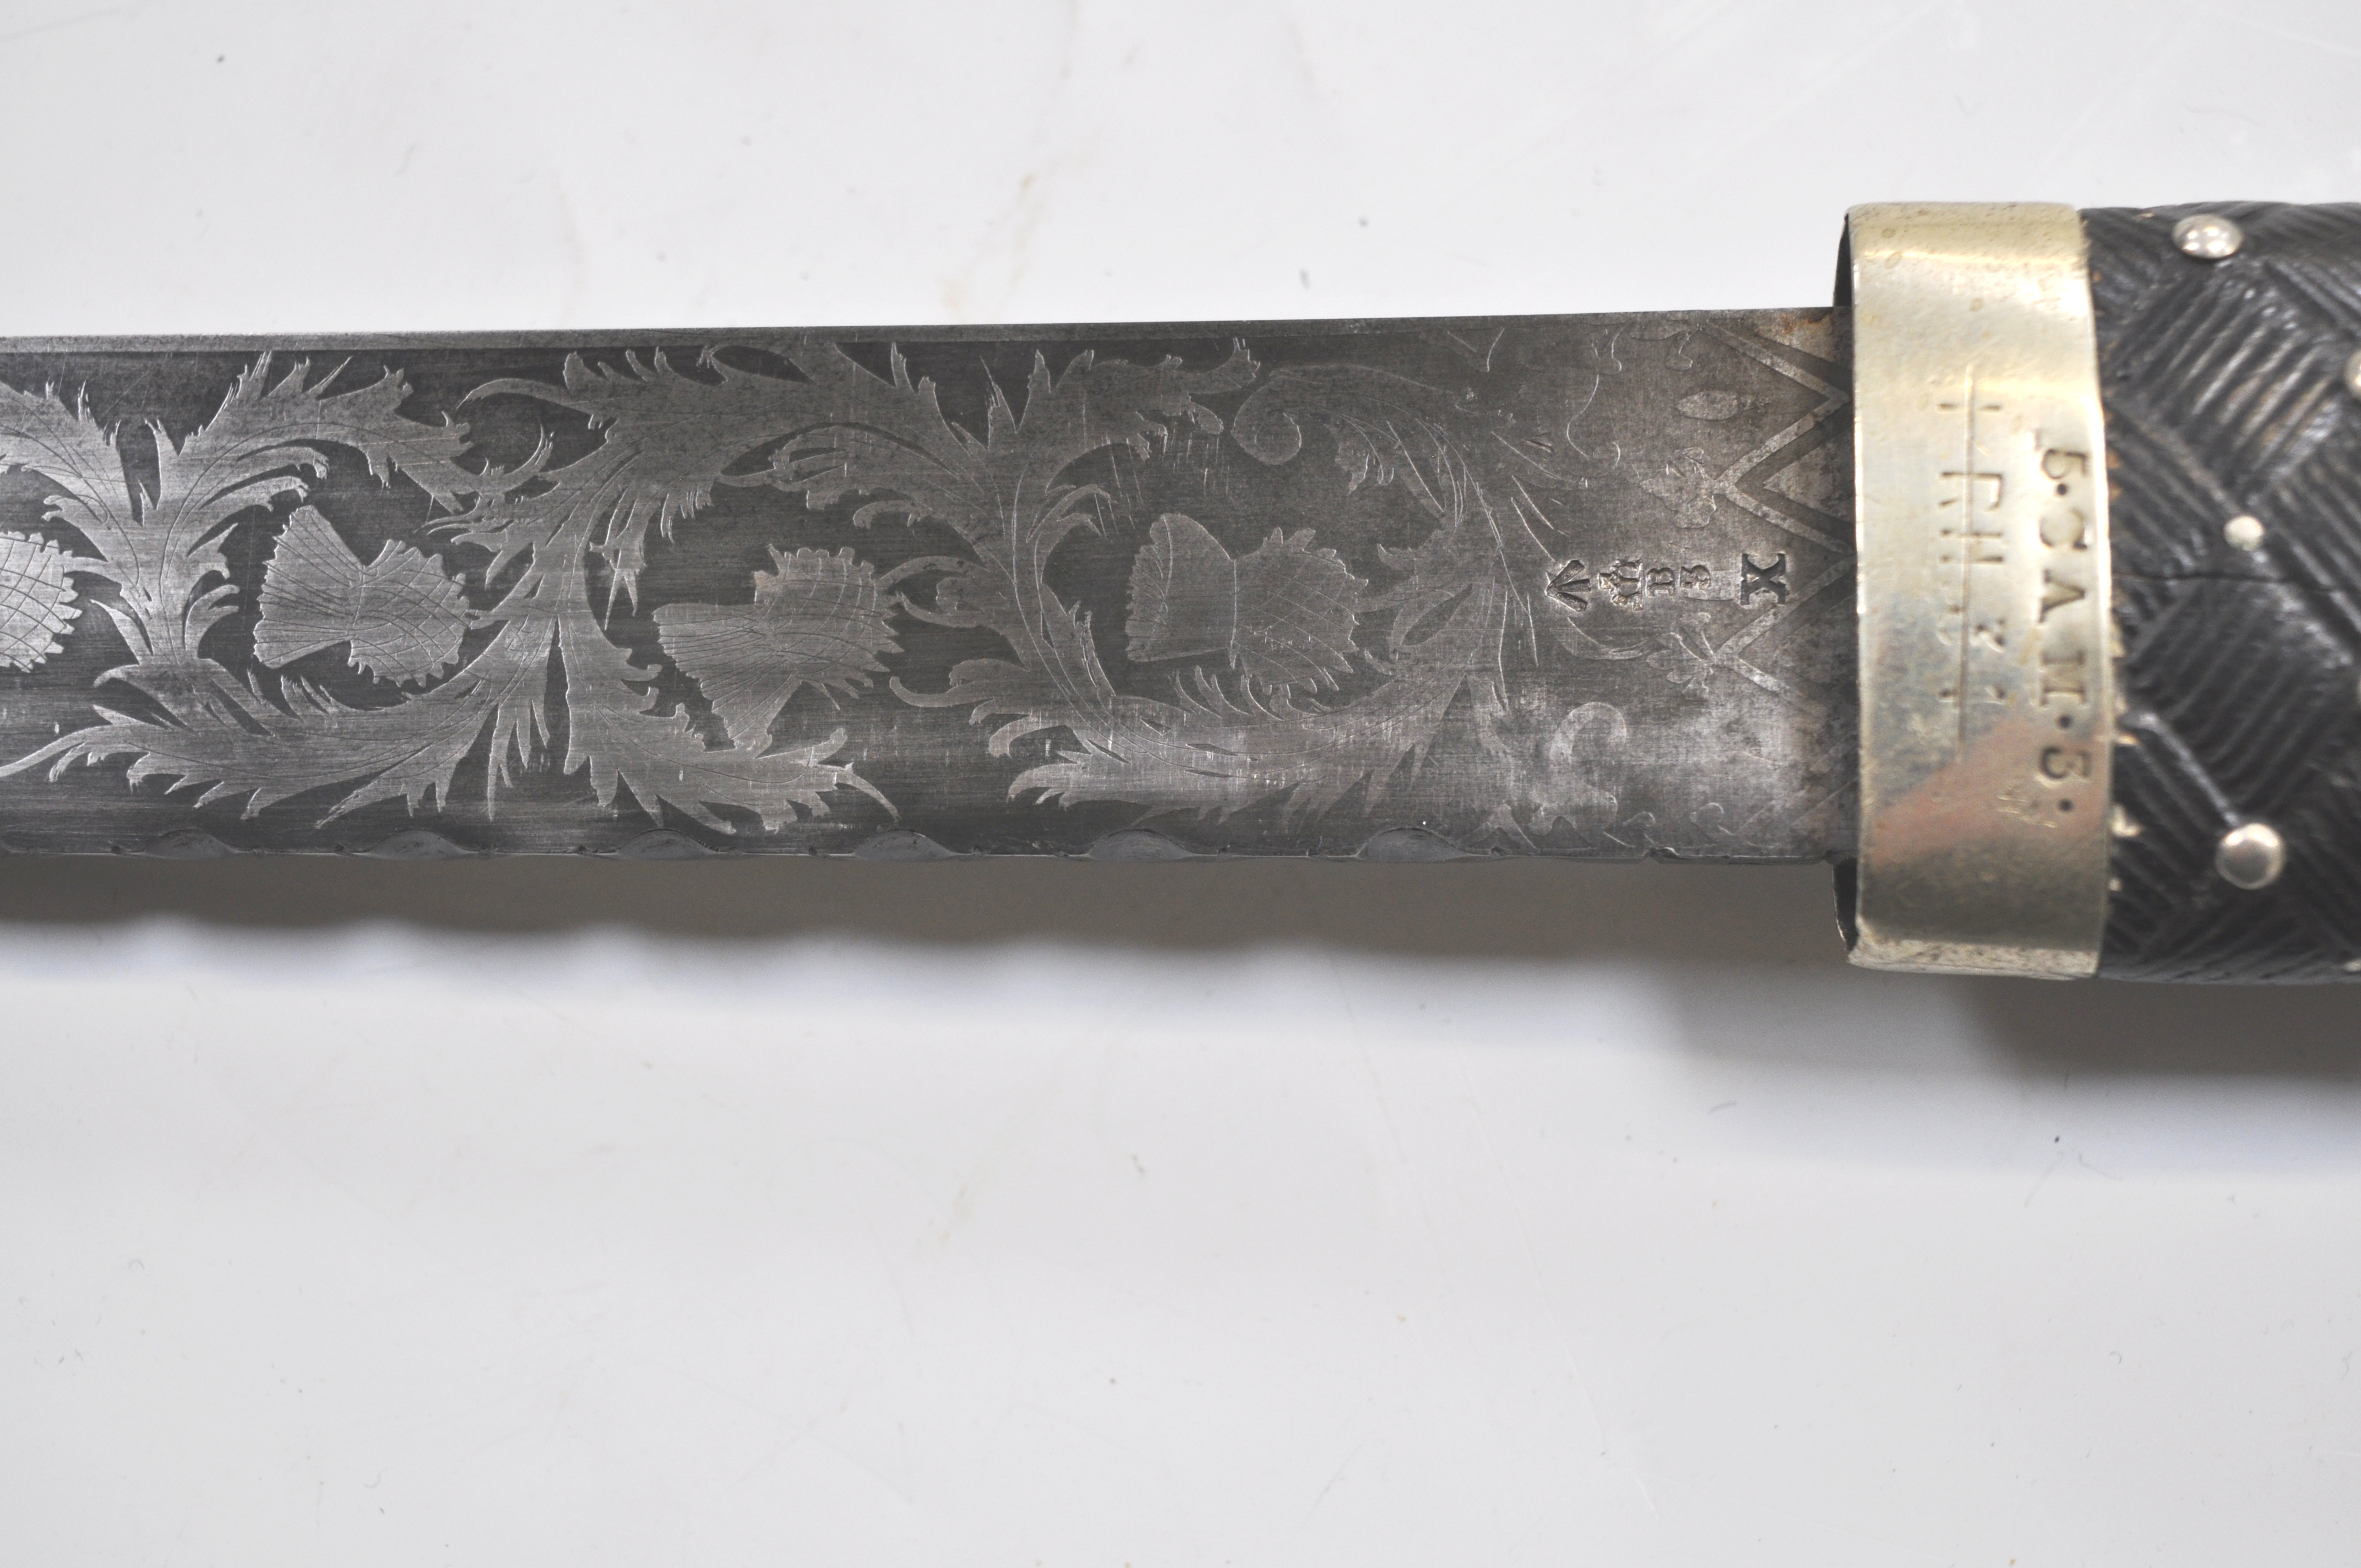 Scottish Military Dirk, the pommel with metal cap and Crown, leather bound studded grip, - Image 5 of 8